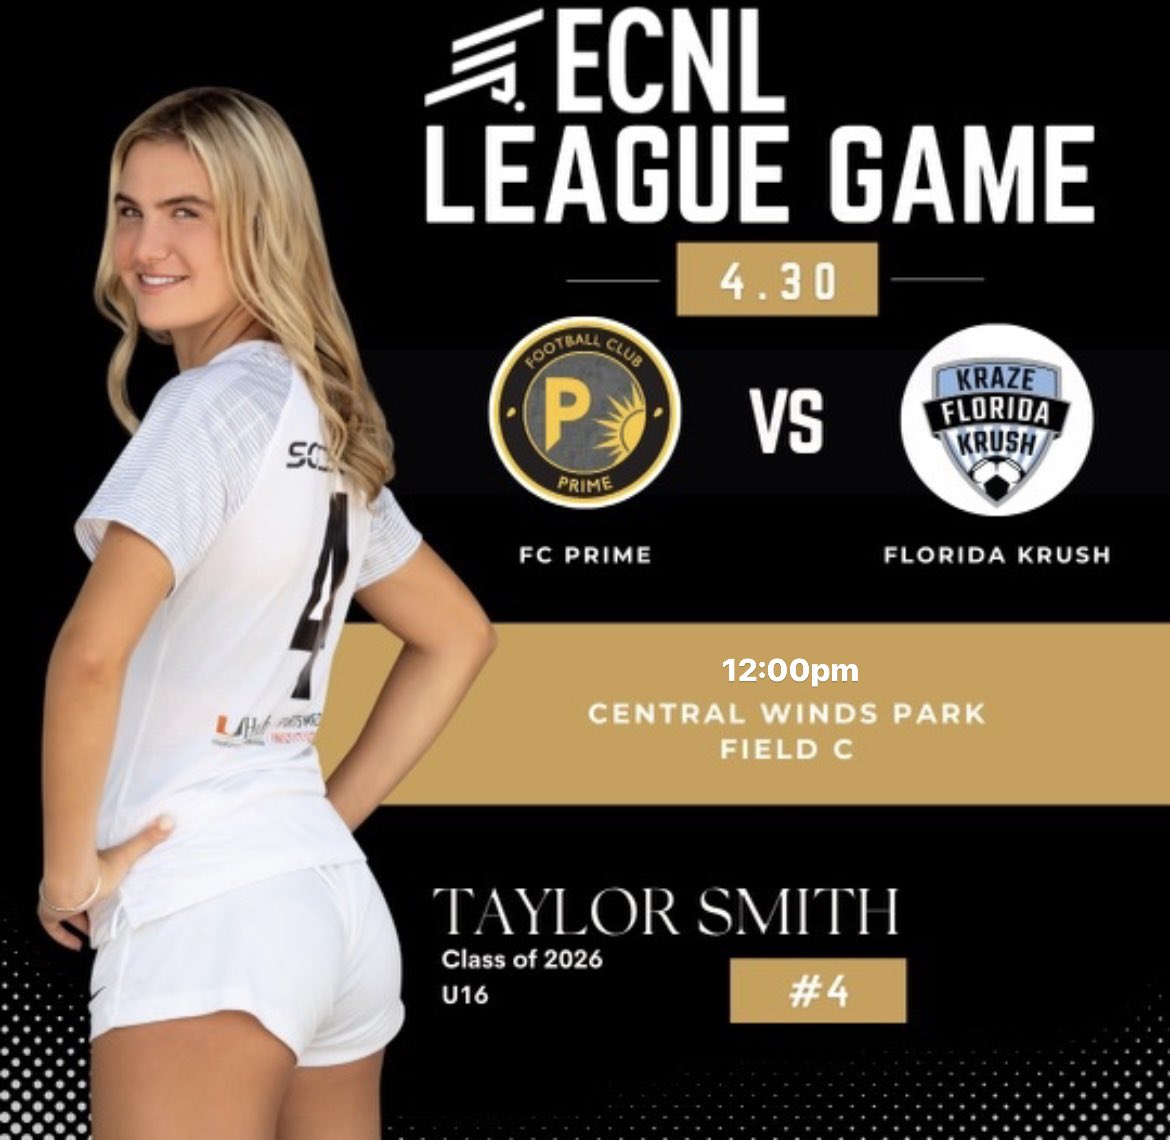 Back at it!! FC Prime vs Florida Krush 12pm today!! @ECNLgirls @FCPrimeOfficial @TopDrawerSoccer @TheSoccerWire @DanLauria3